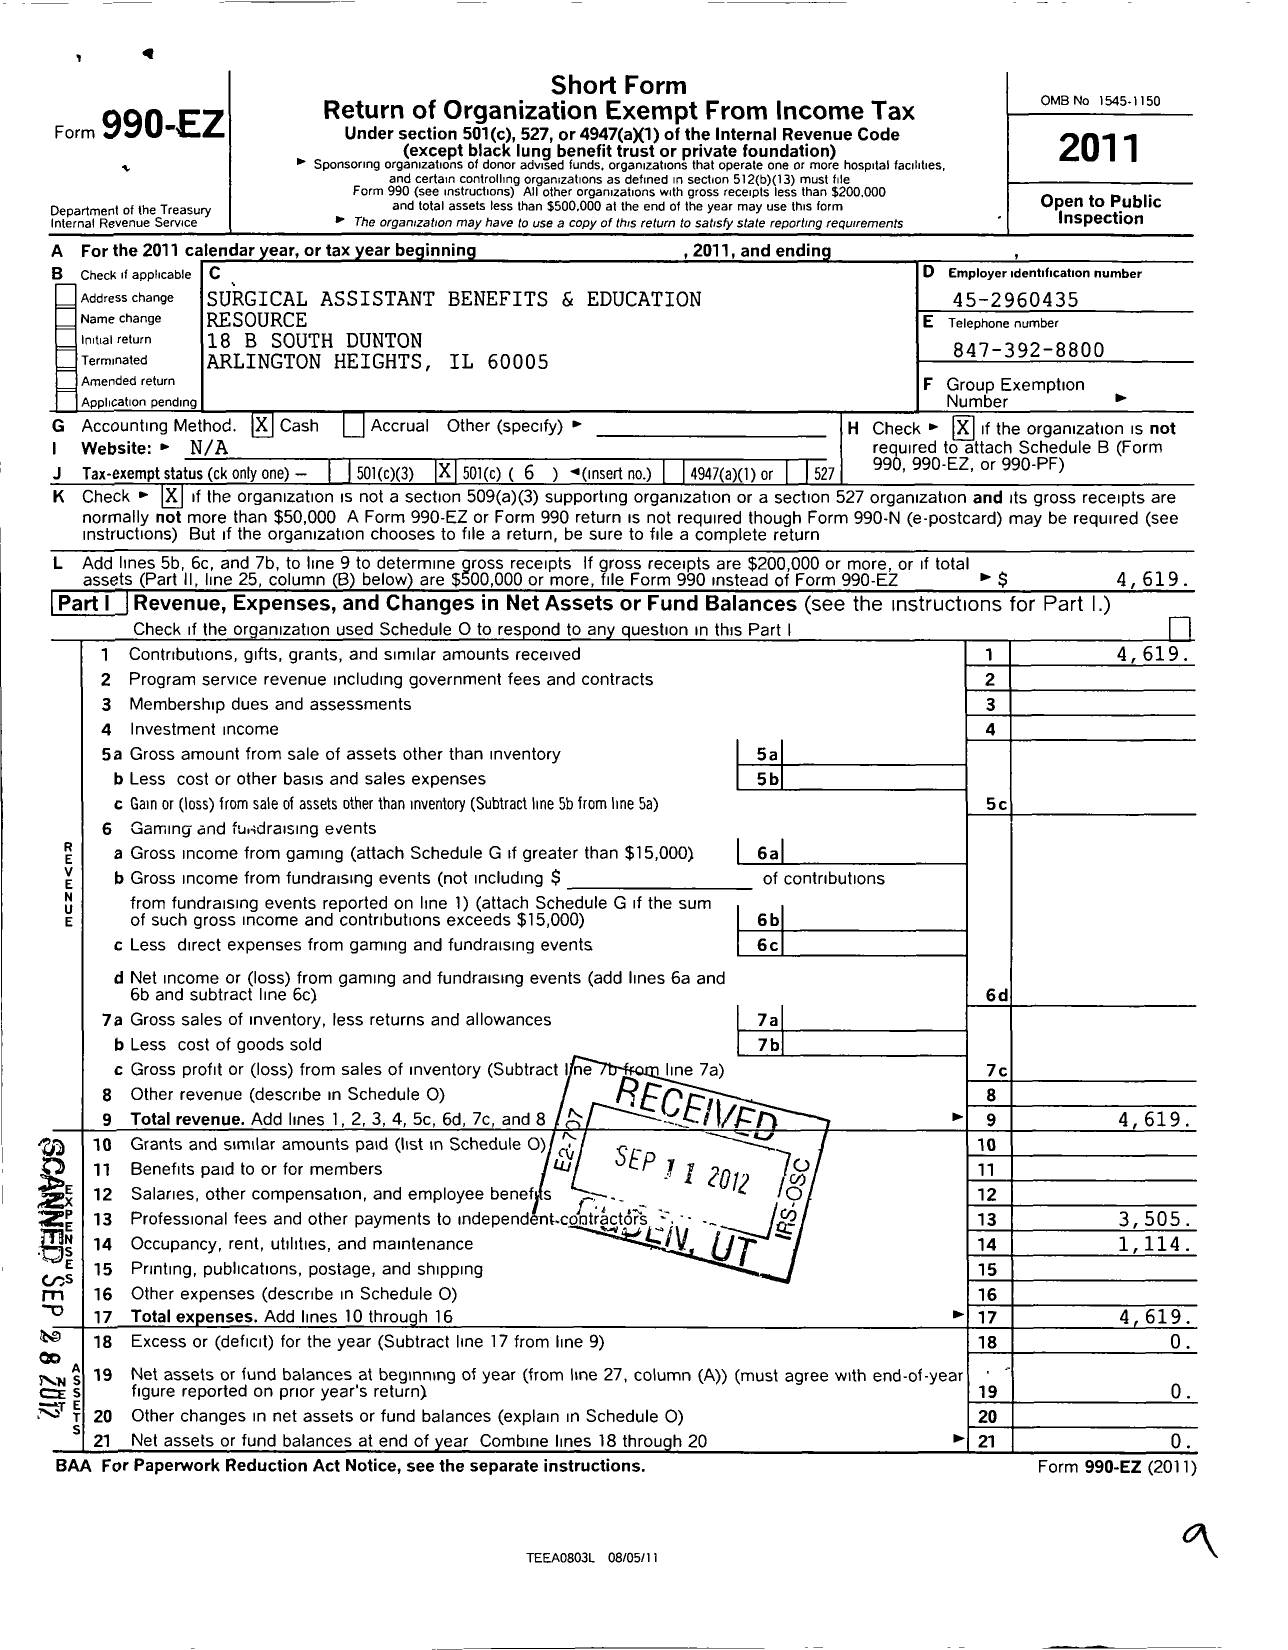 Image of first page of 2011 Form 990EO for Surgical Assistants Benefits and Education Resource